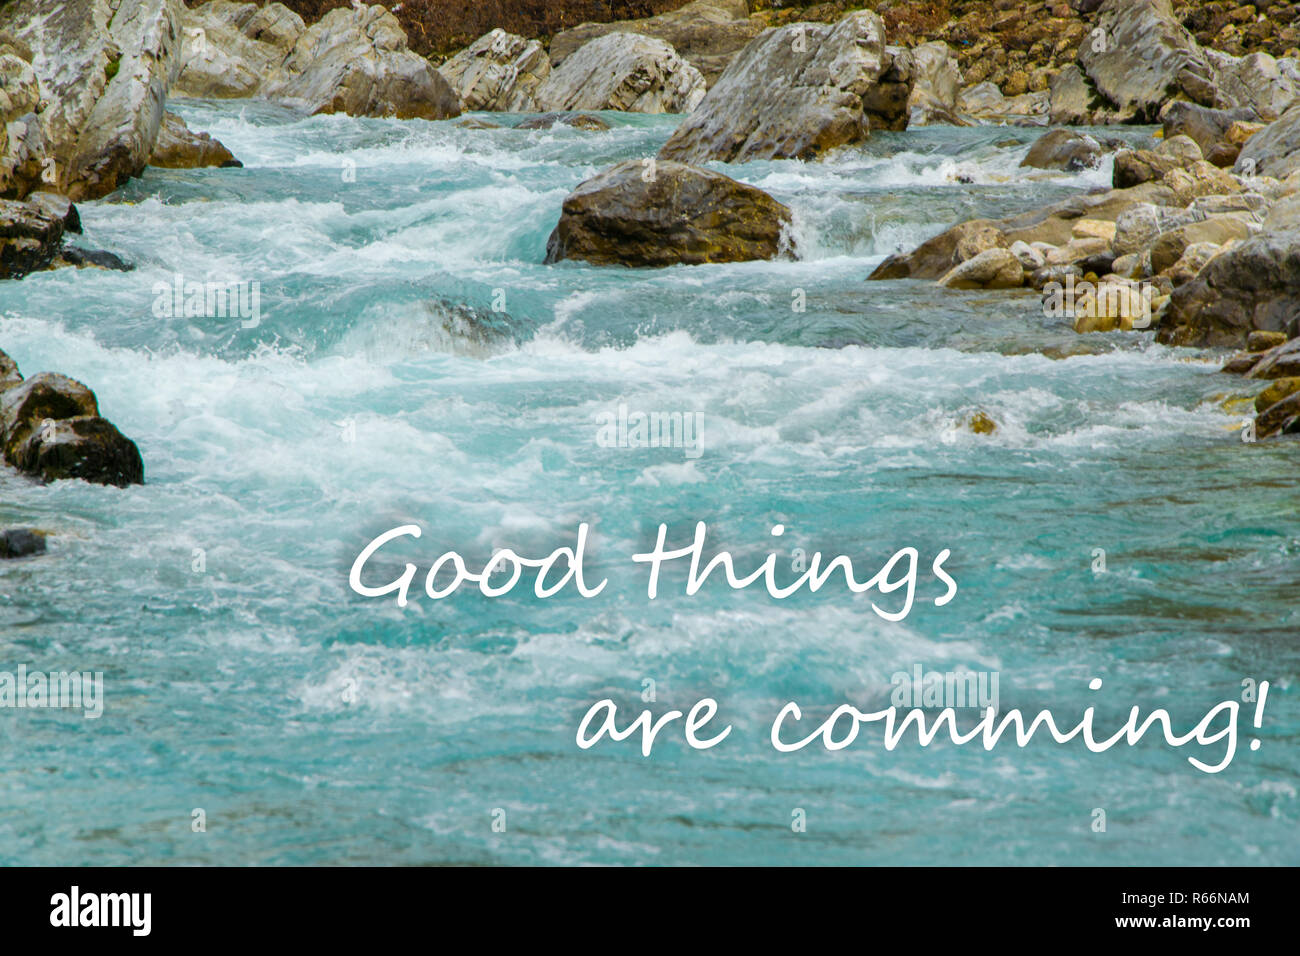 Scenic nature background with text 'Good things are comming' Stock Photo